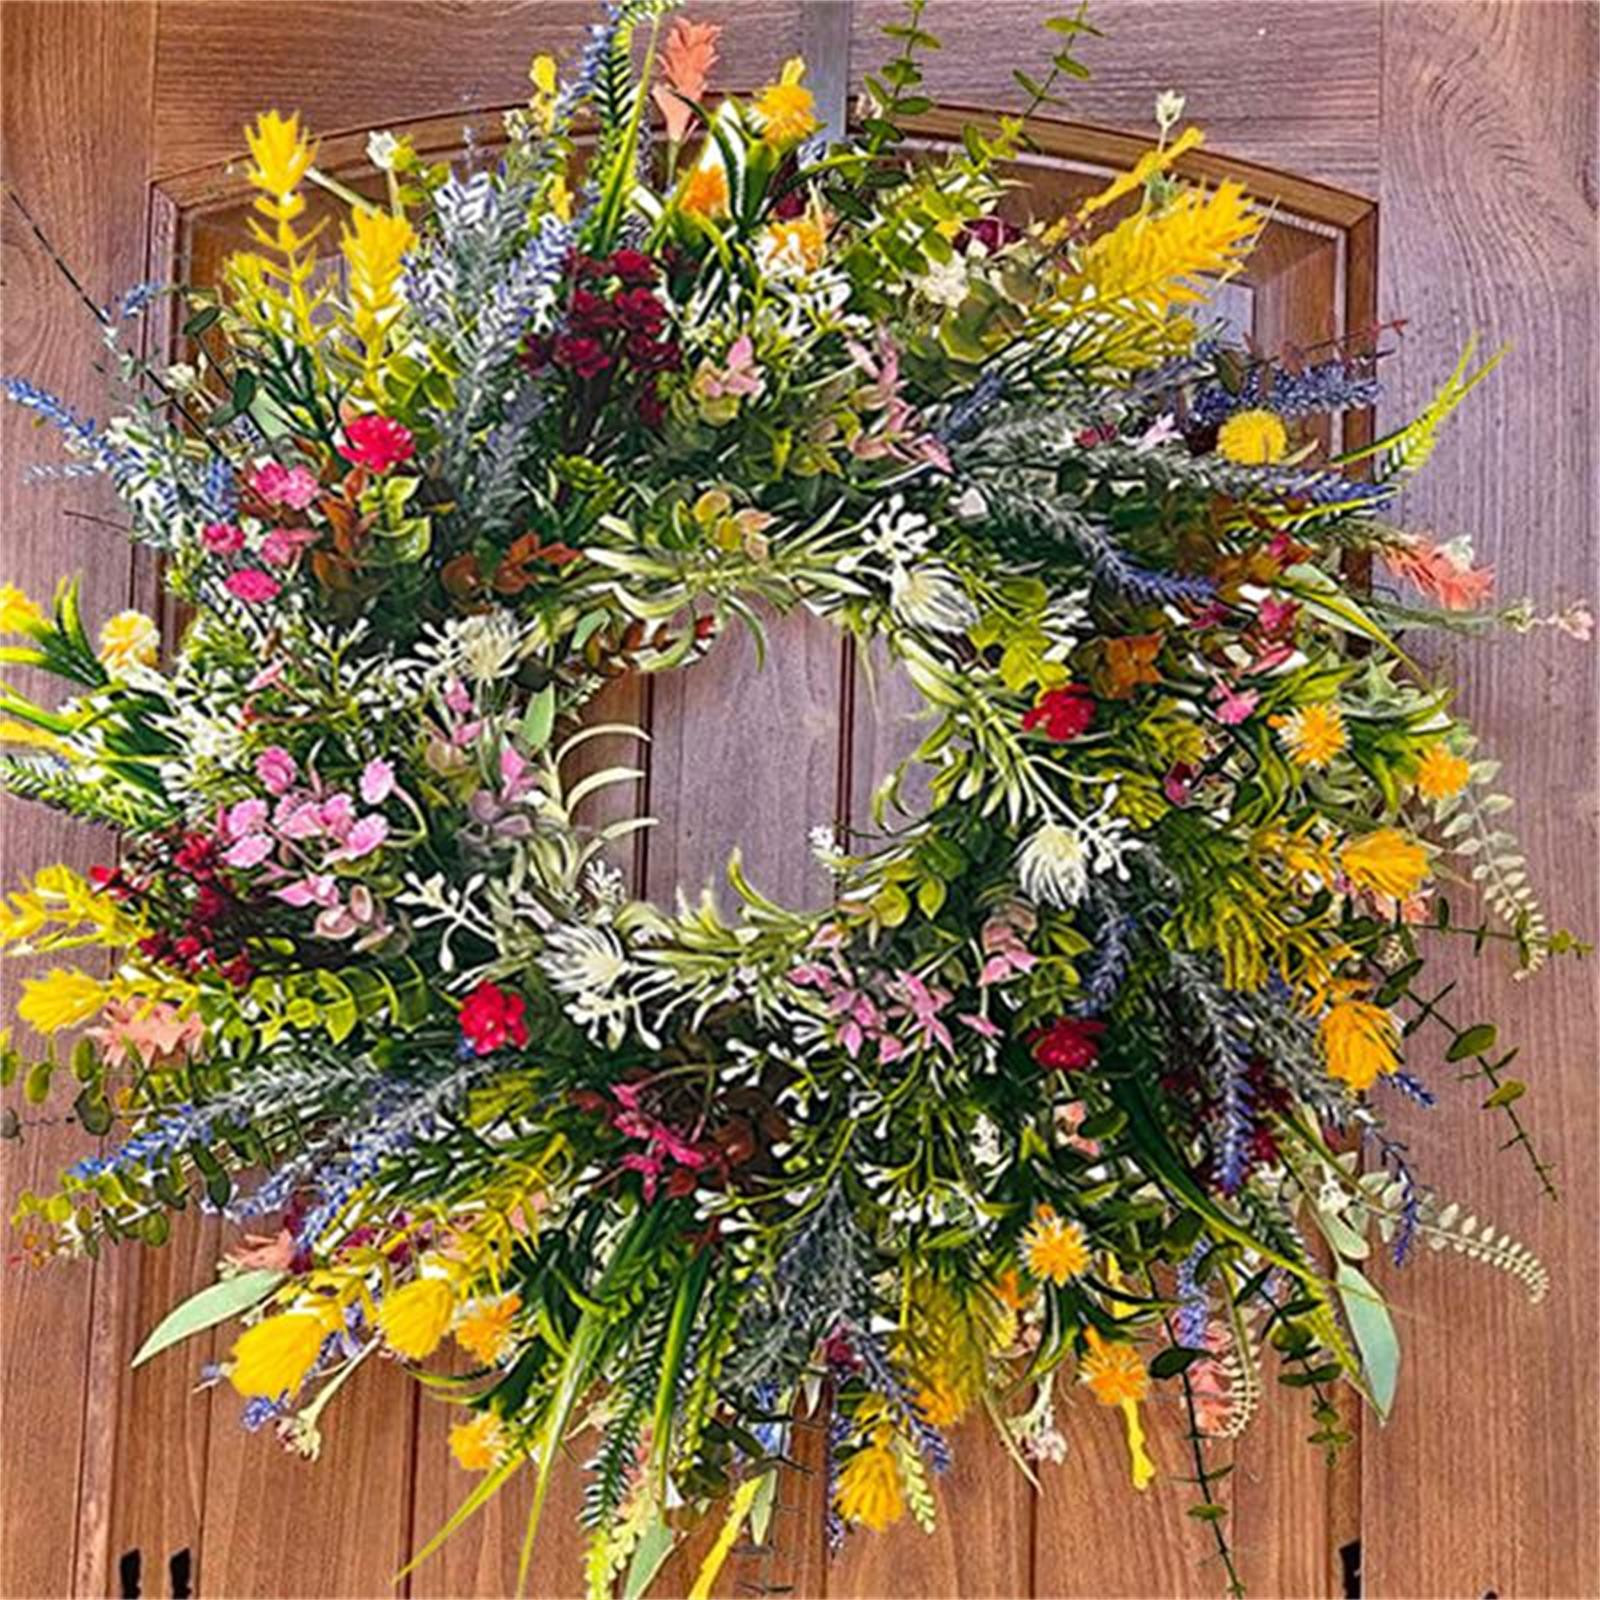 Fankiway Home Decor Spring Wreath On The Outdoor Front Door Welcomes Summer Flowers, Weather Proof Green Year-round Wreath, Home, Rural Outdoor Interior Decoration Home Decor Gifts - image 1 of 5